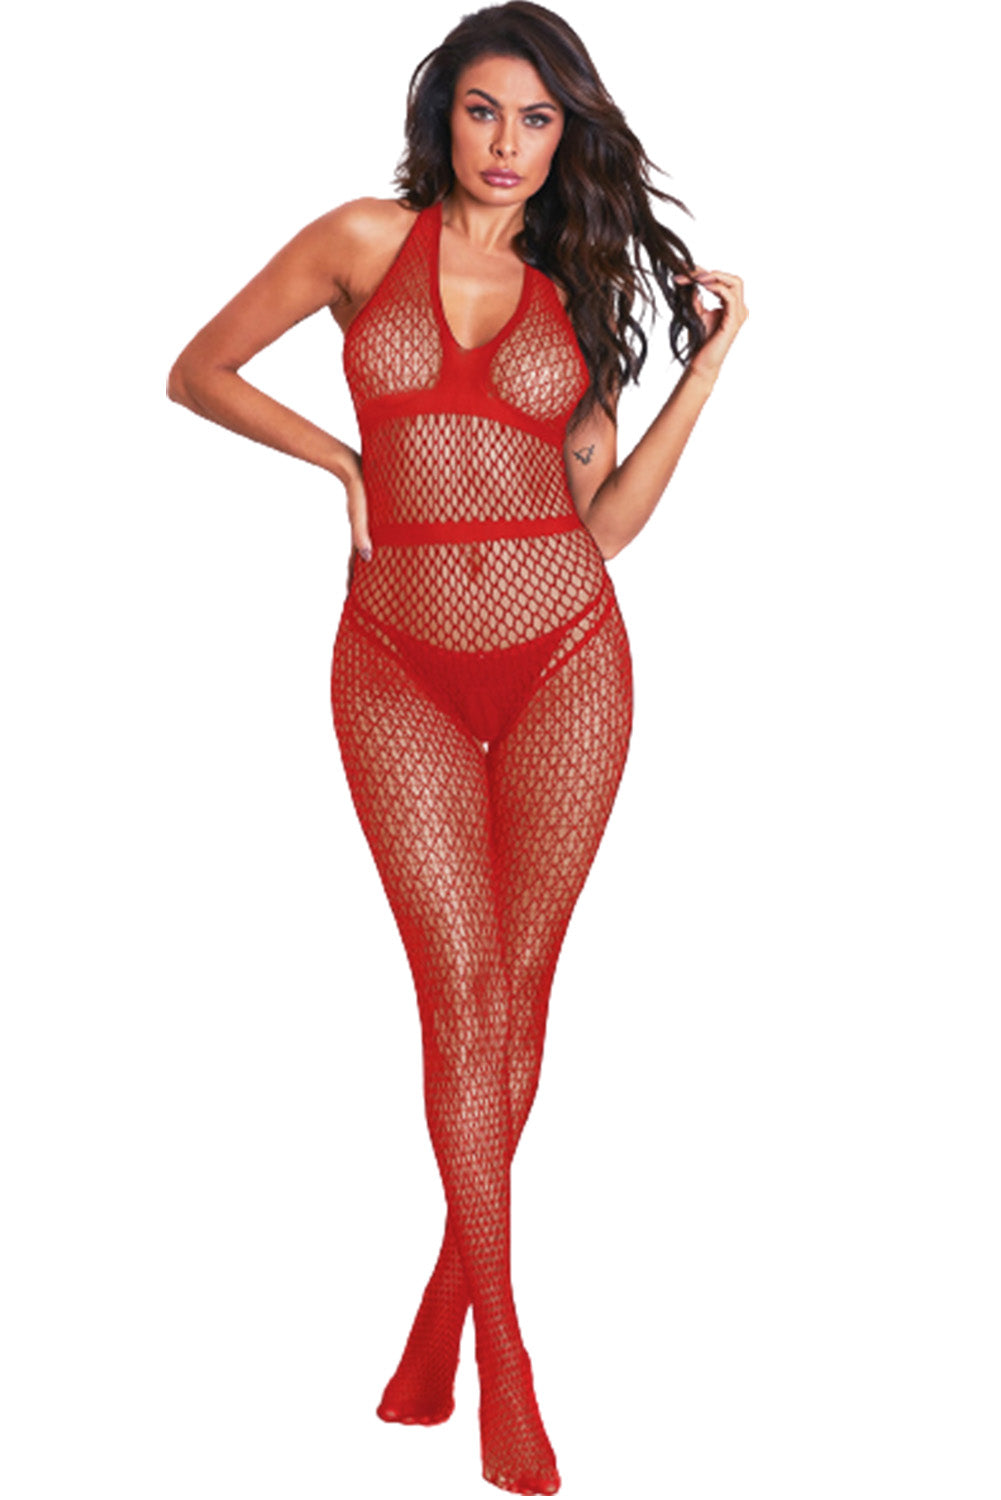 Halter Neck Open Back Netted Contrast Halter Crotchless Bodystocking Sai Feel